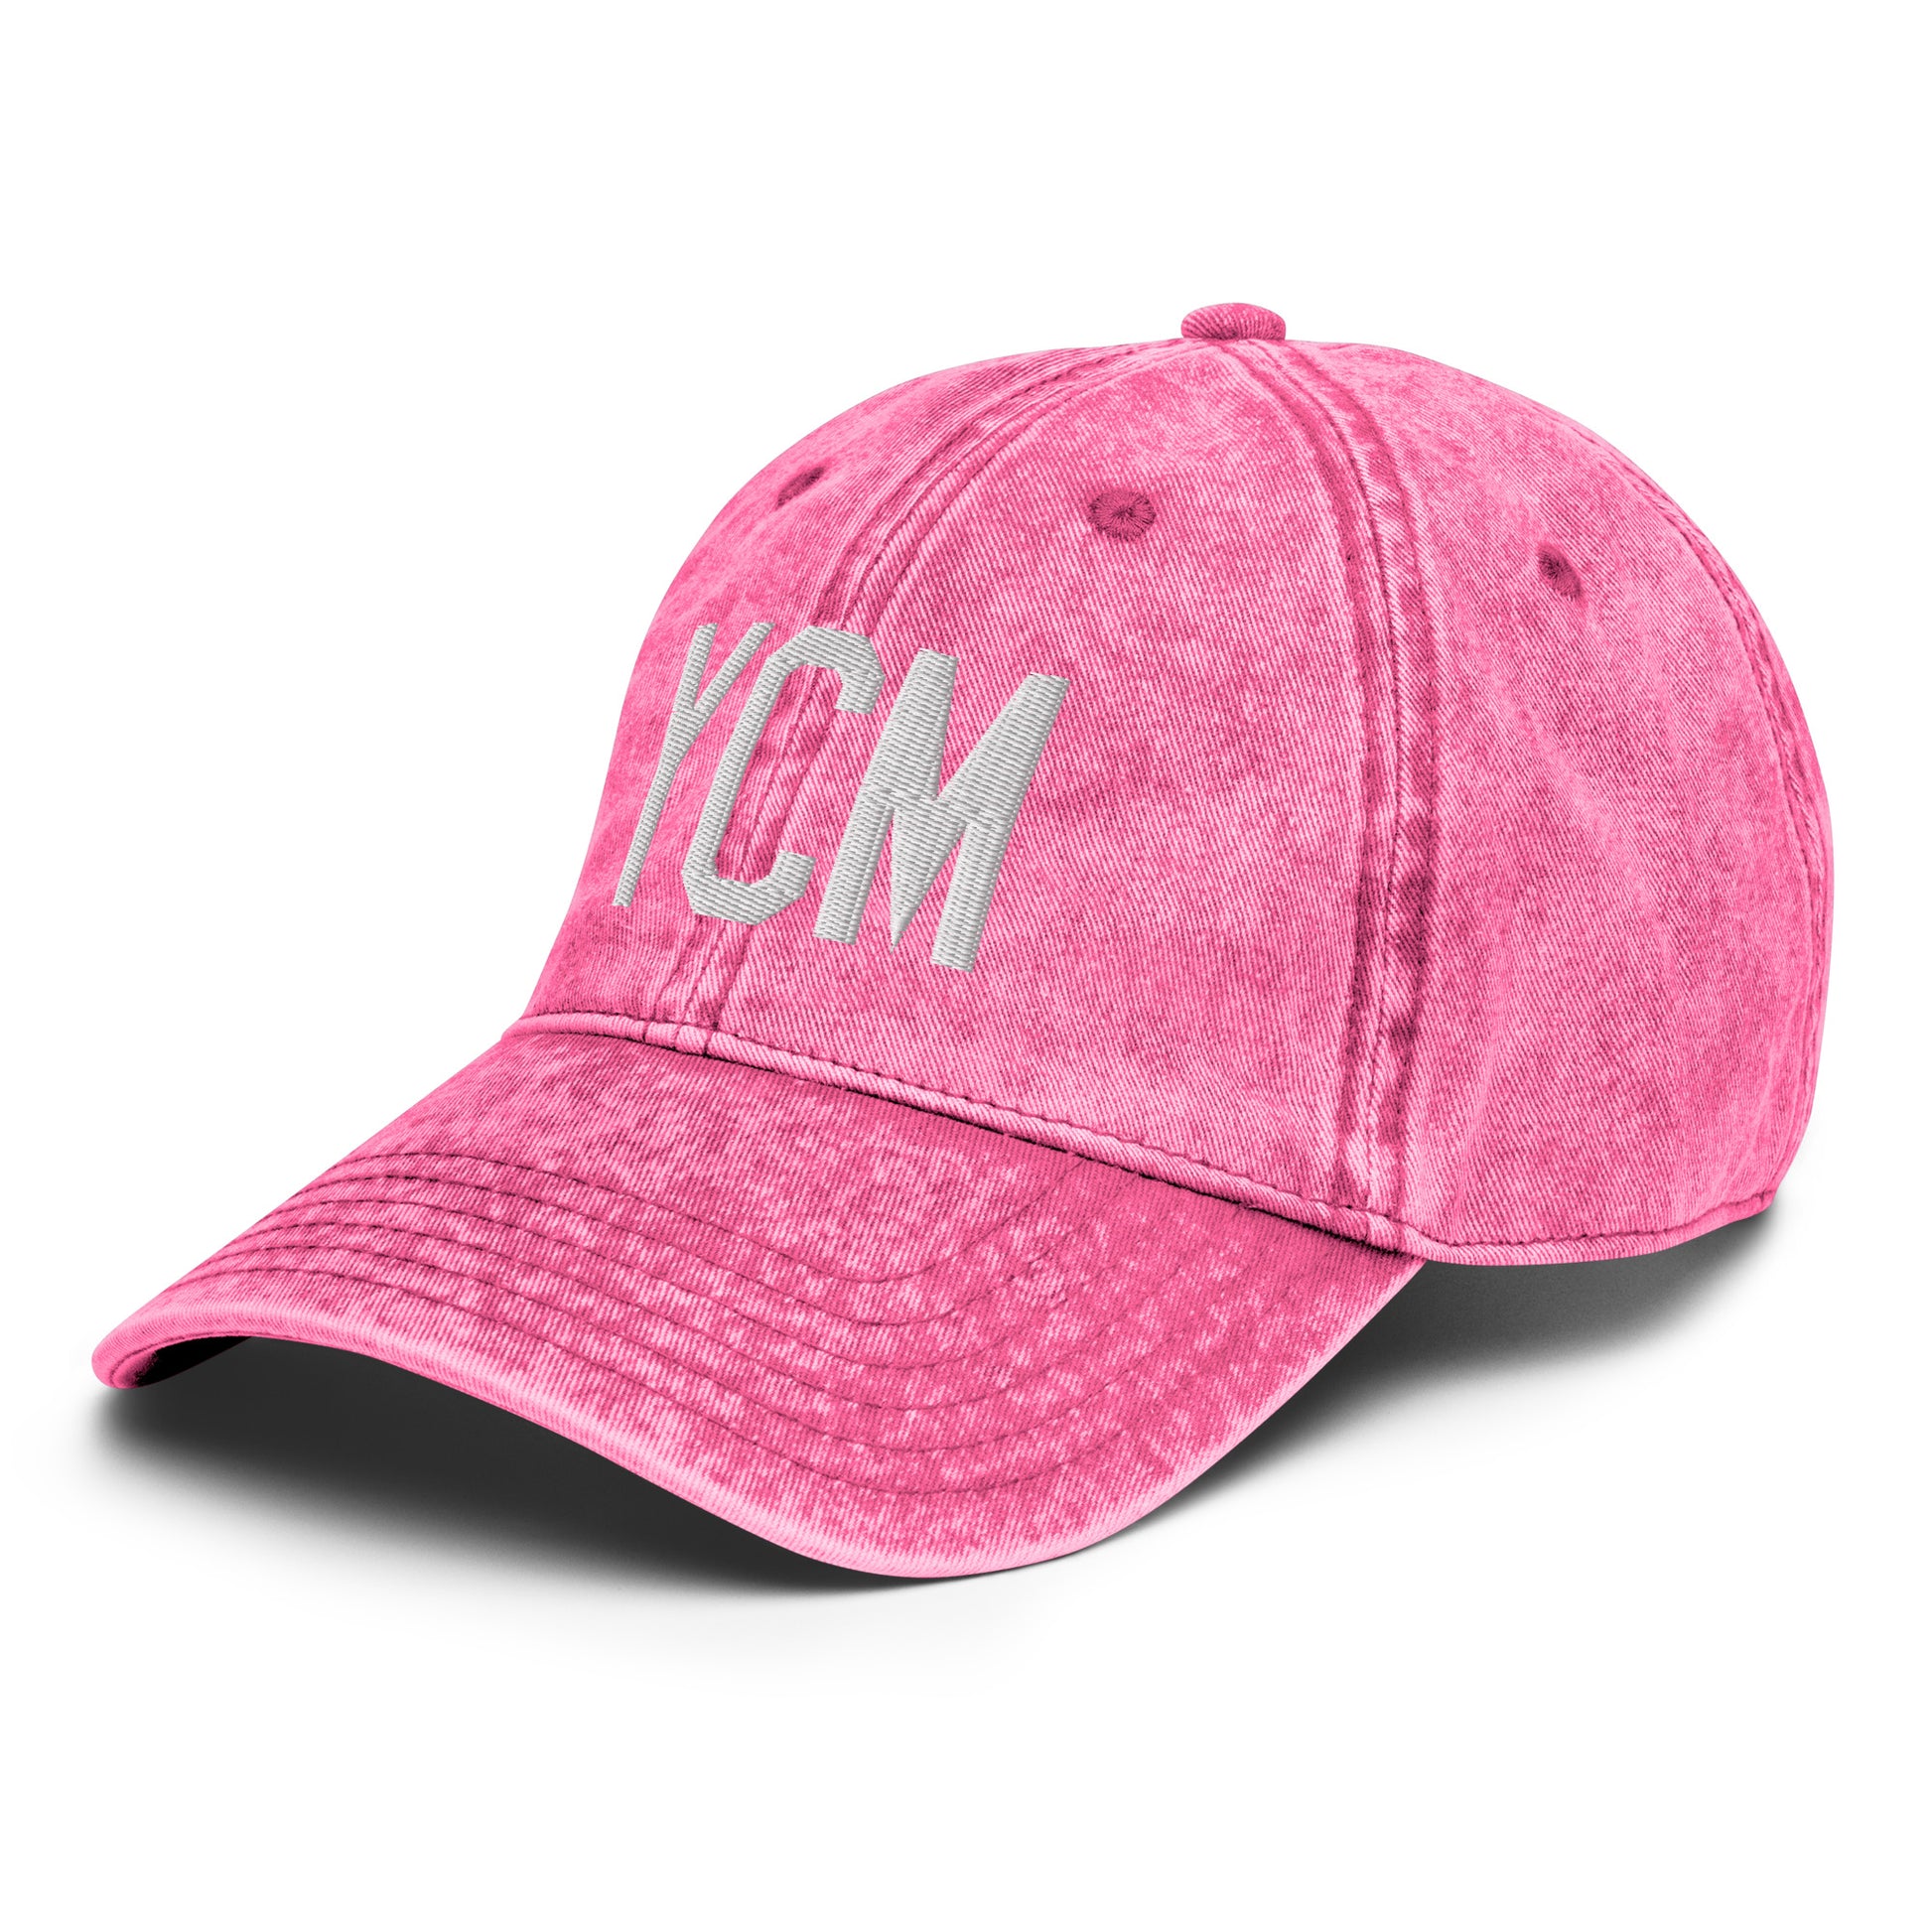 Airport Code Twill Cap - White • YCM St. Catharines • YHM Designs - Image 26